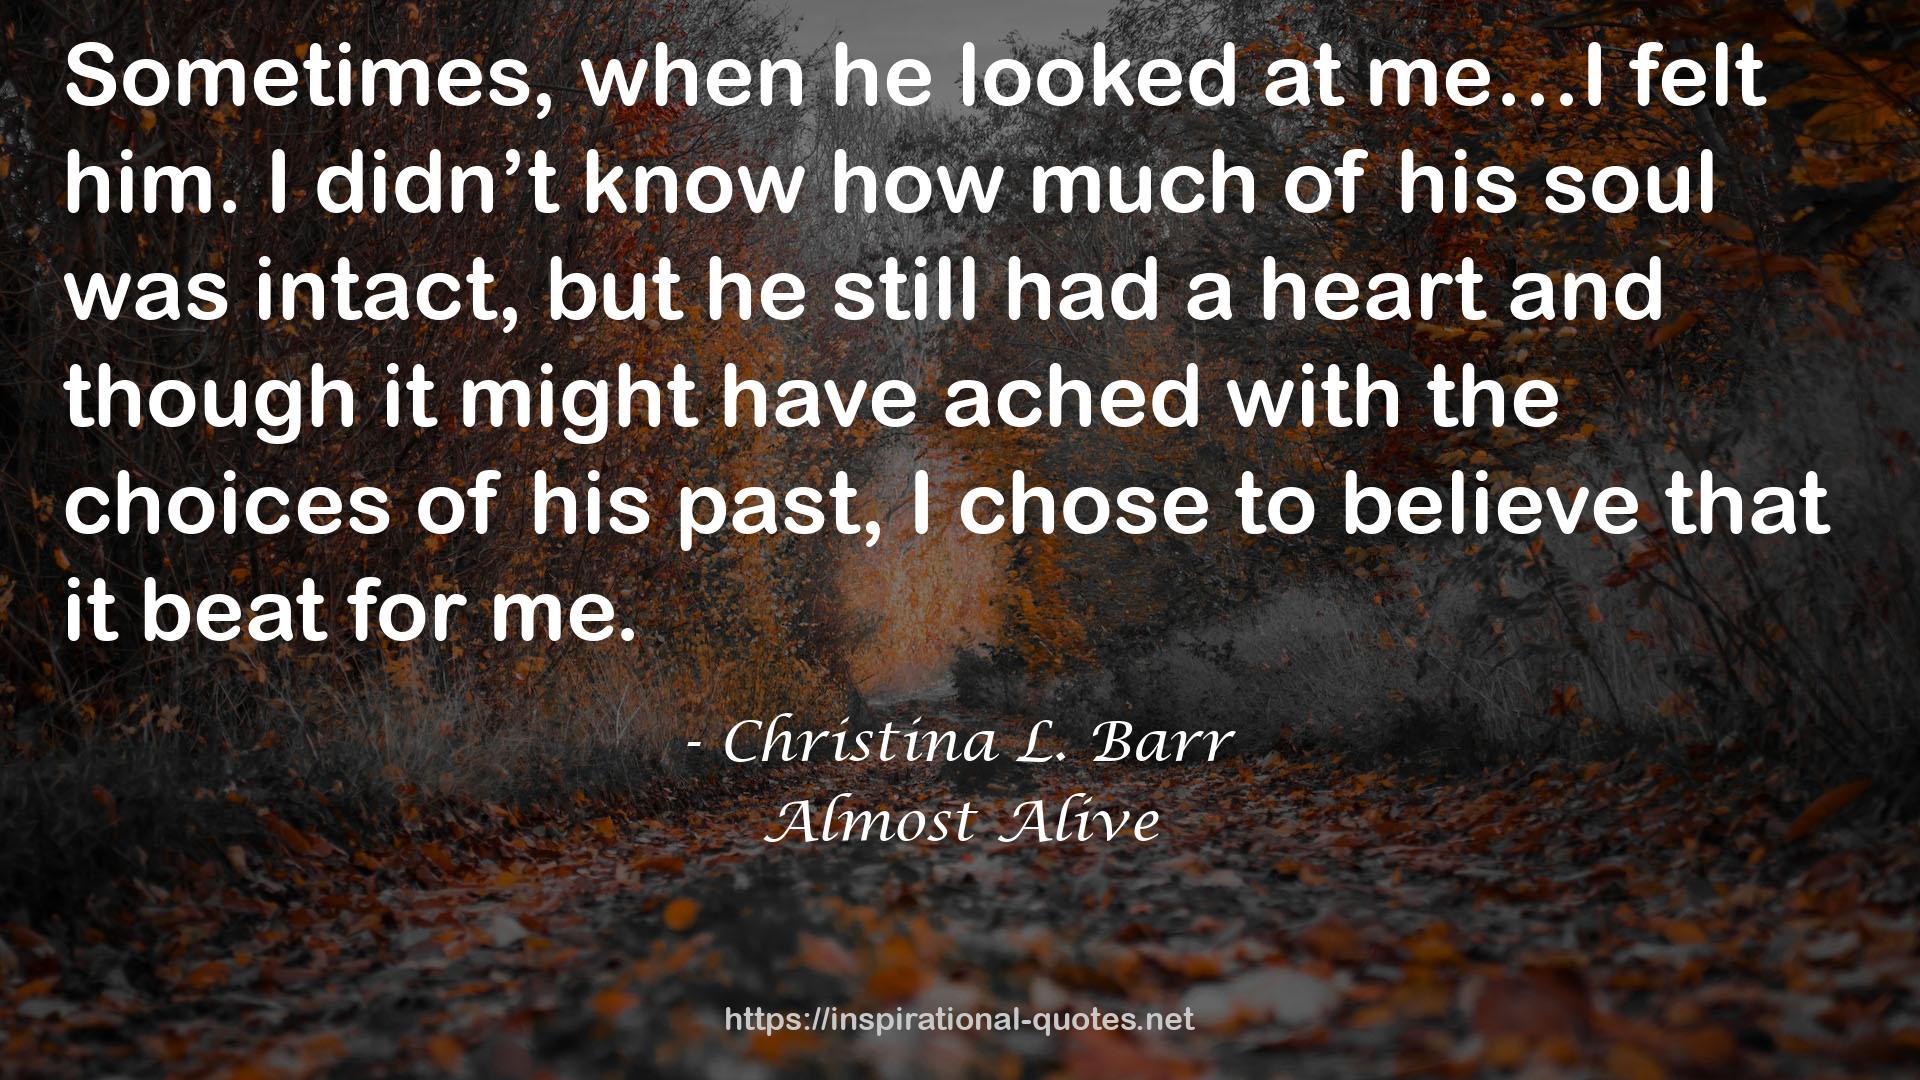 Almost Alive QUOTES